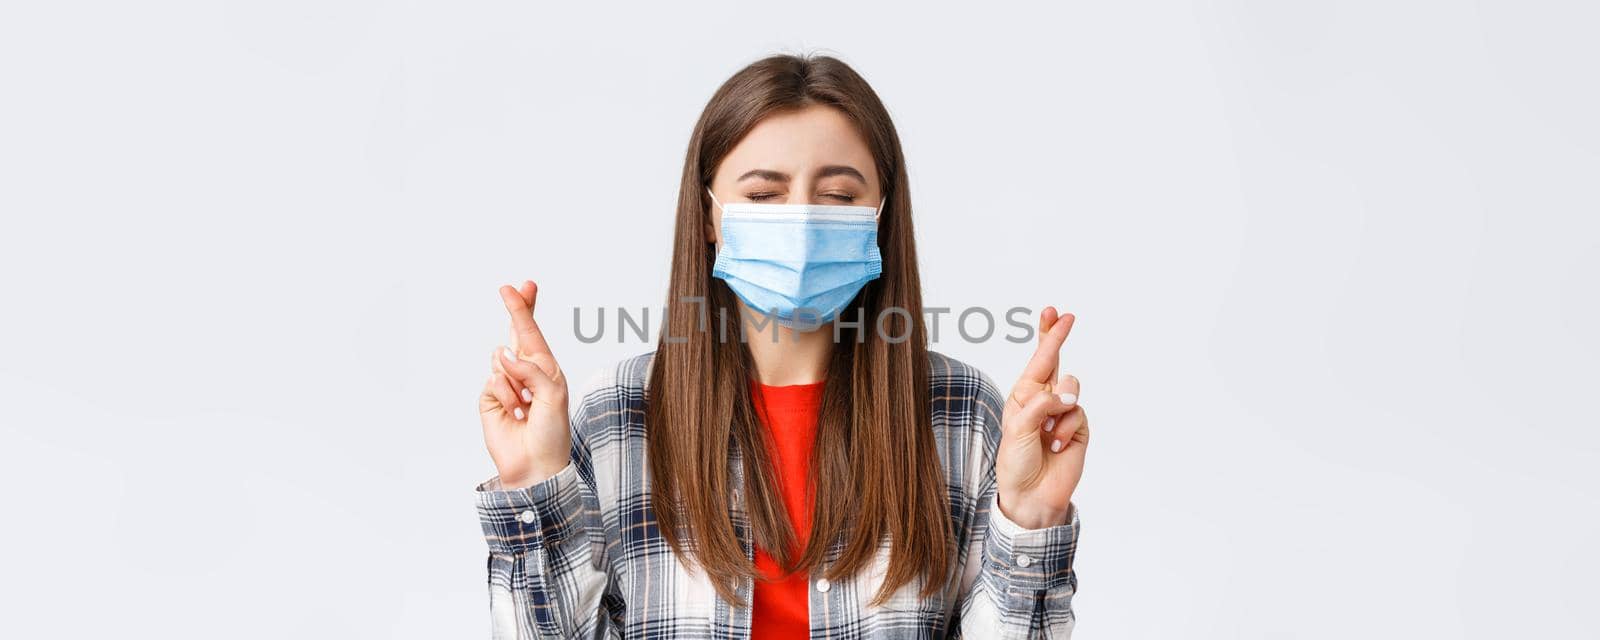 Coronavirus outbreak, leisure on quarantine, social distancing and emotions concept. Close-up of hopeful, dreamy young girl making wish, close eyes and cross fingers good luck.